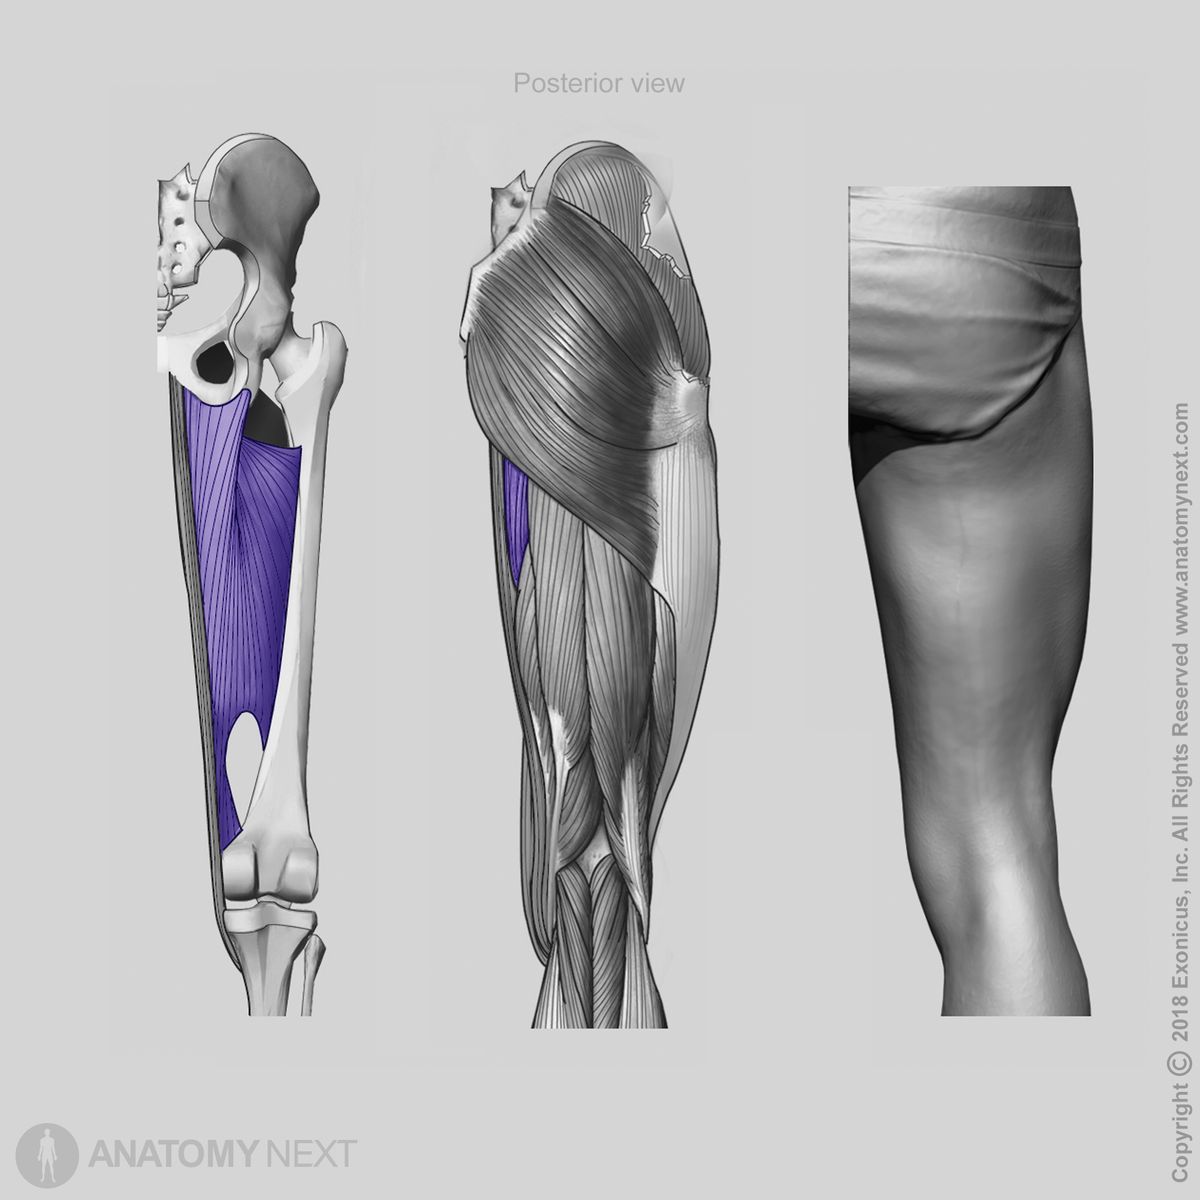 Adductor magnus, Anterior view of adductor magnus, Origin of adductor magnus, Insertion of adductor magnus, Thigh adductors, Thigh muscles, Medial compartment muscles, Medial compartment of thigh, Human muscles